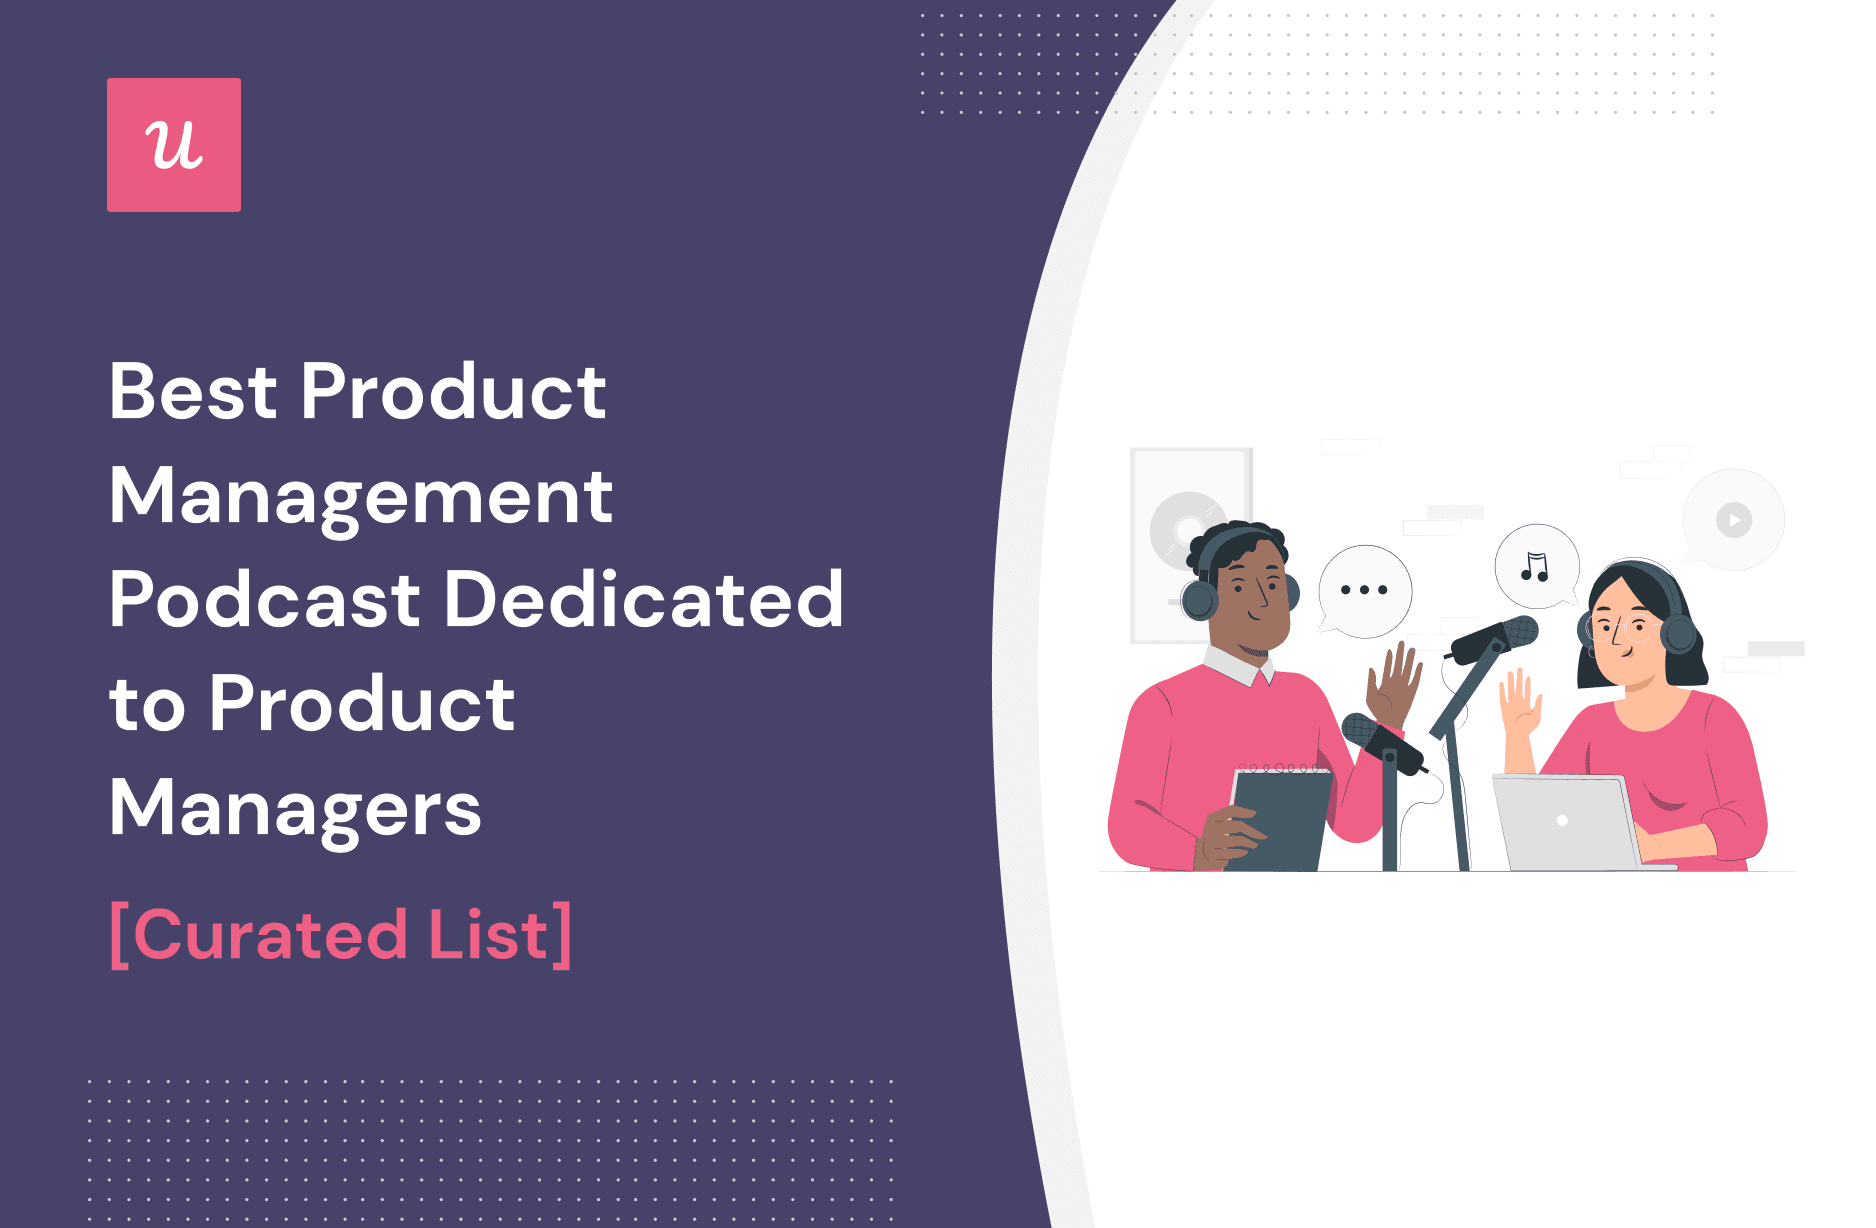 Best Product Management Podcast Dedicated to Product Managers [Curated List] cover